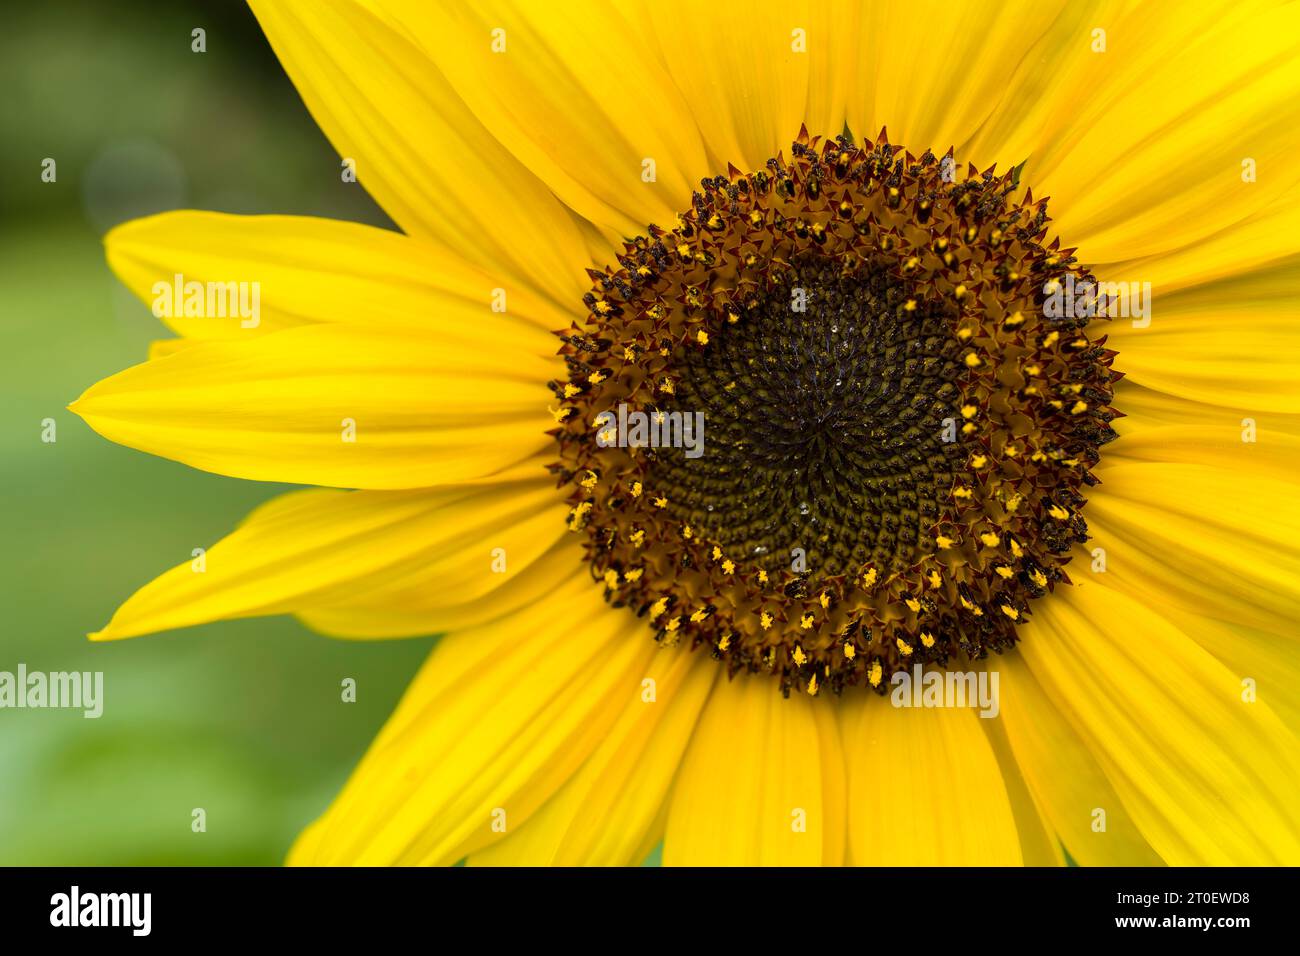 Close-up of a sunflower (Helianthus annuus) flower, flower basket with tubular flowers and yellow petals, Germany Stock Photo